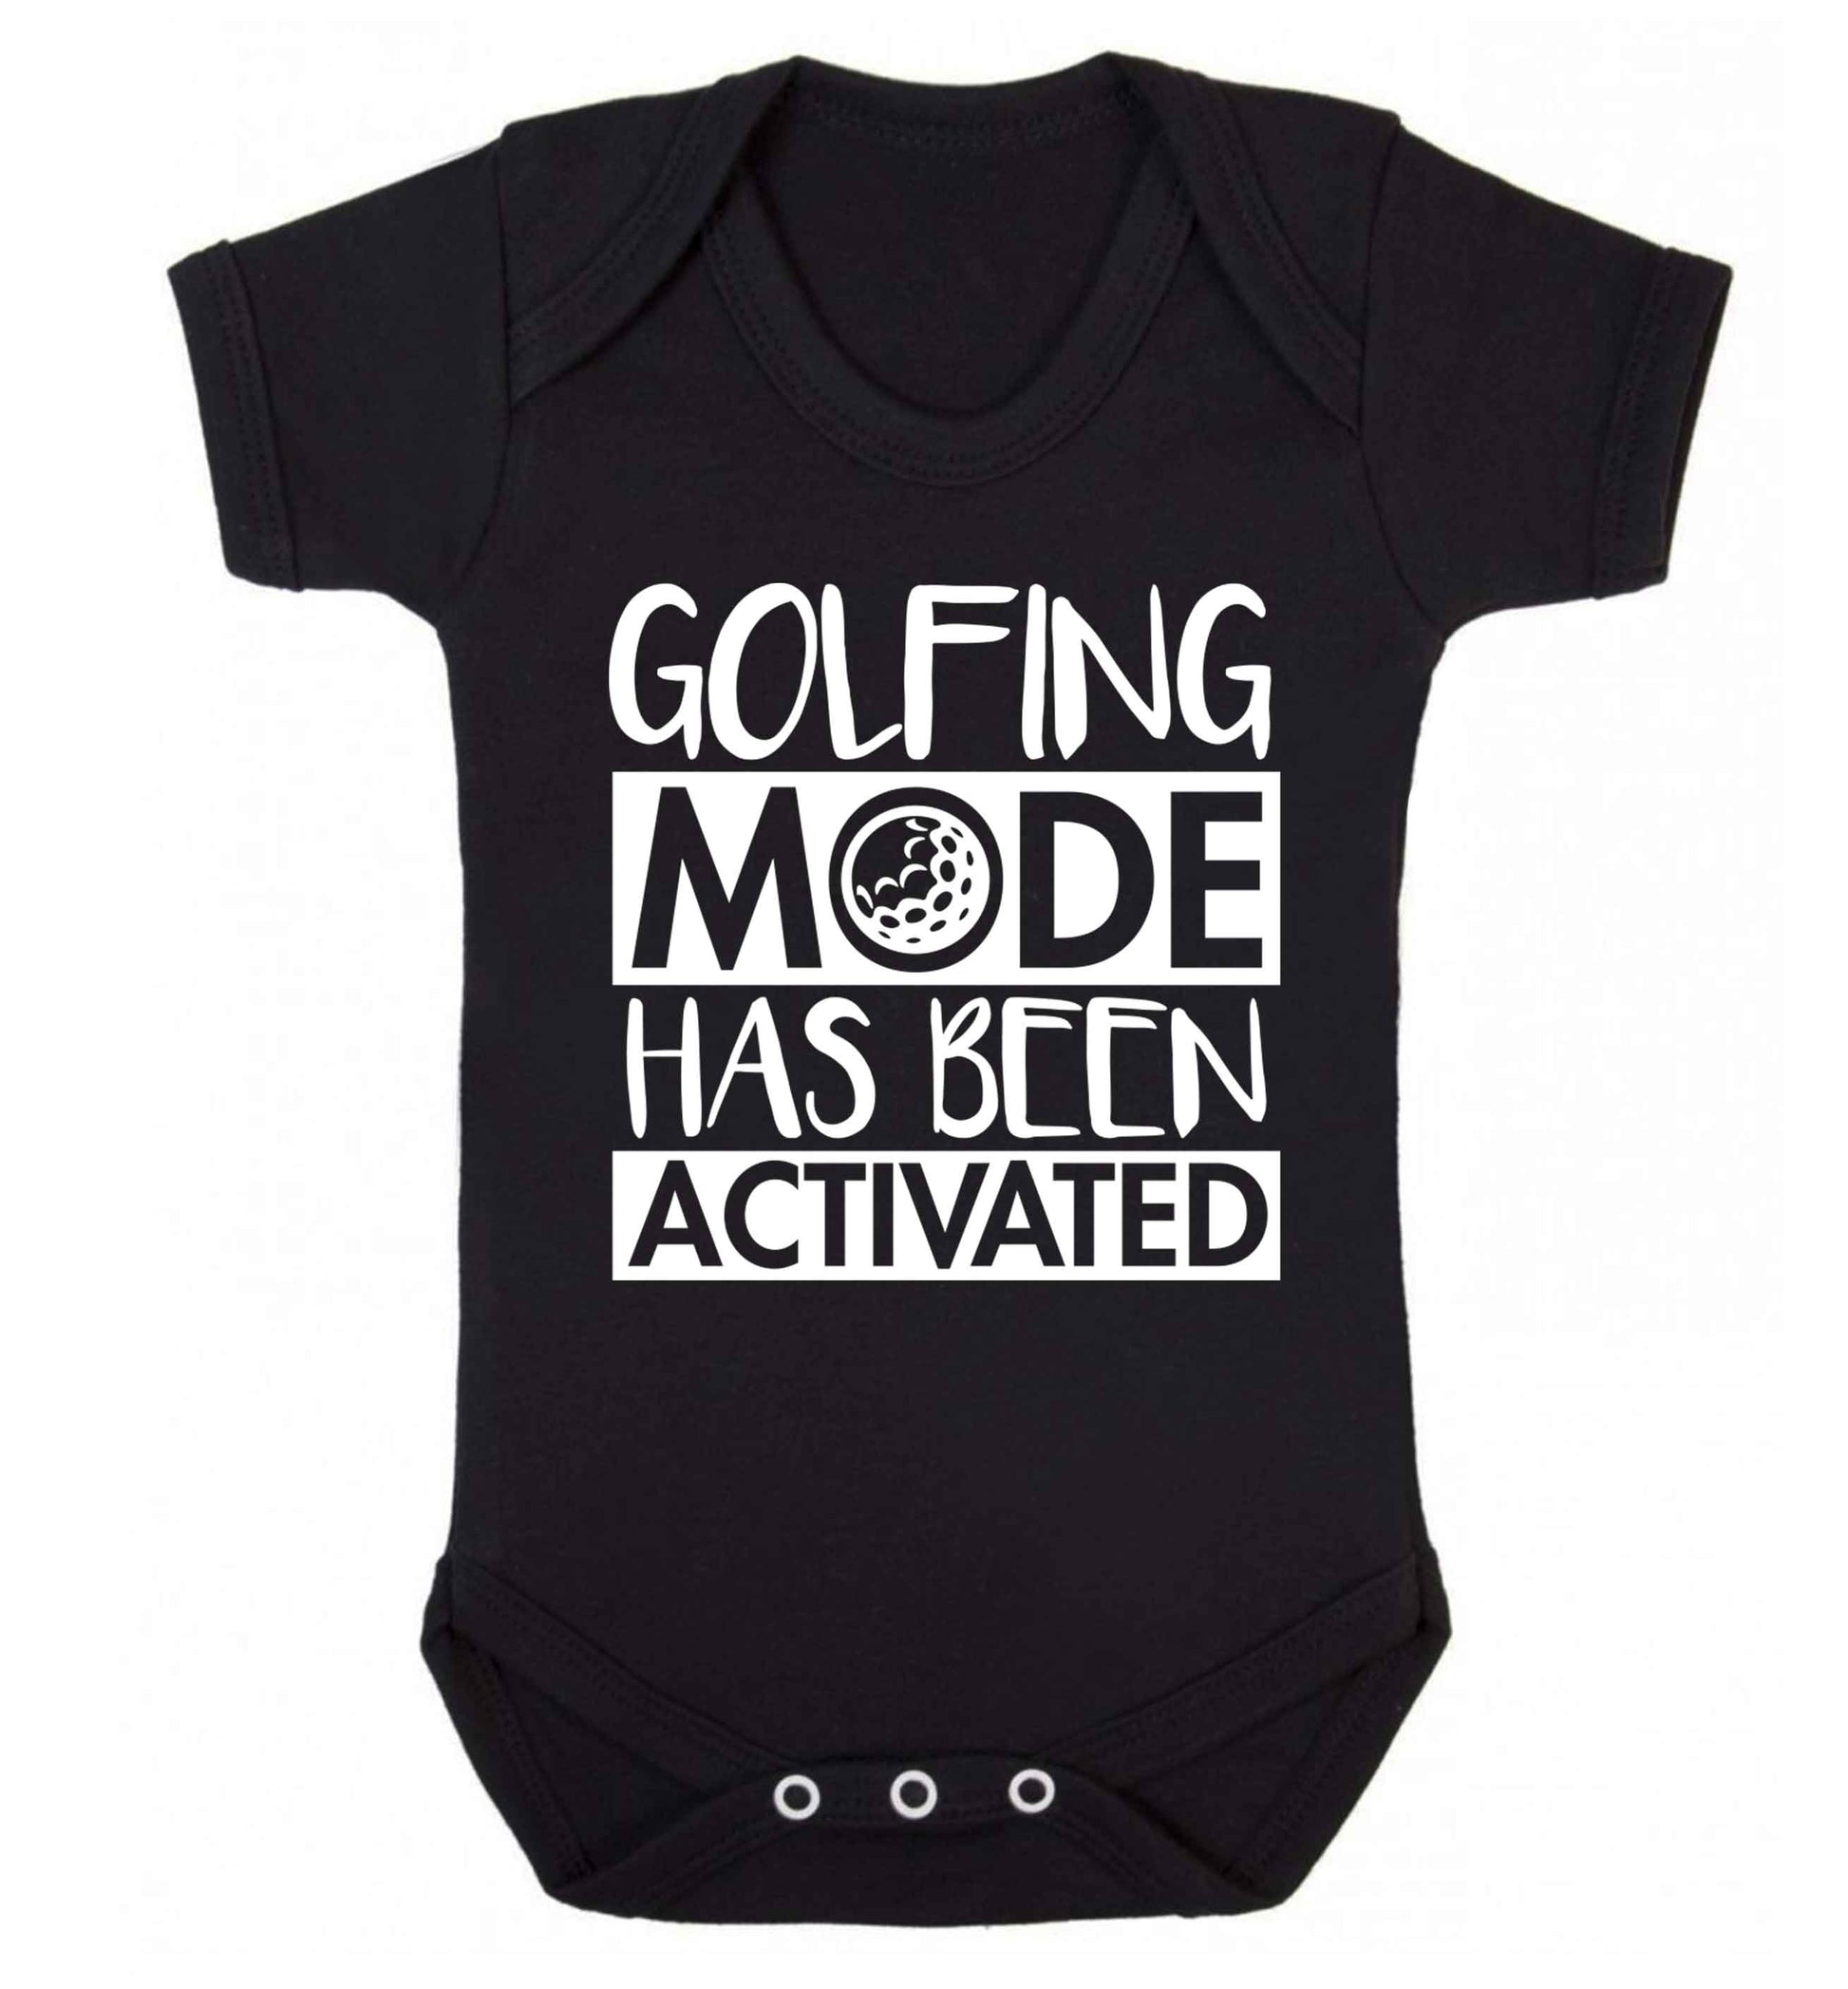 Golfing mode has been activated Baby Vest black 18-24 months